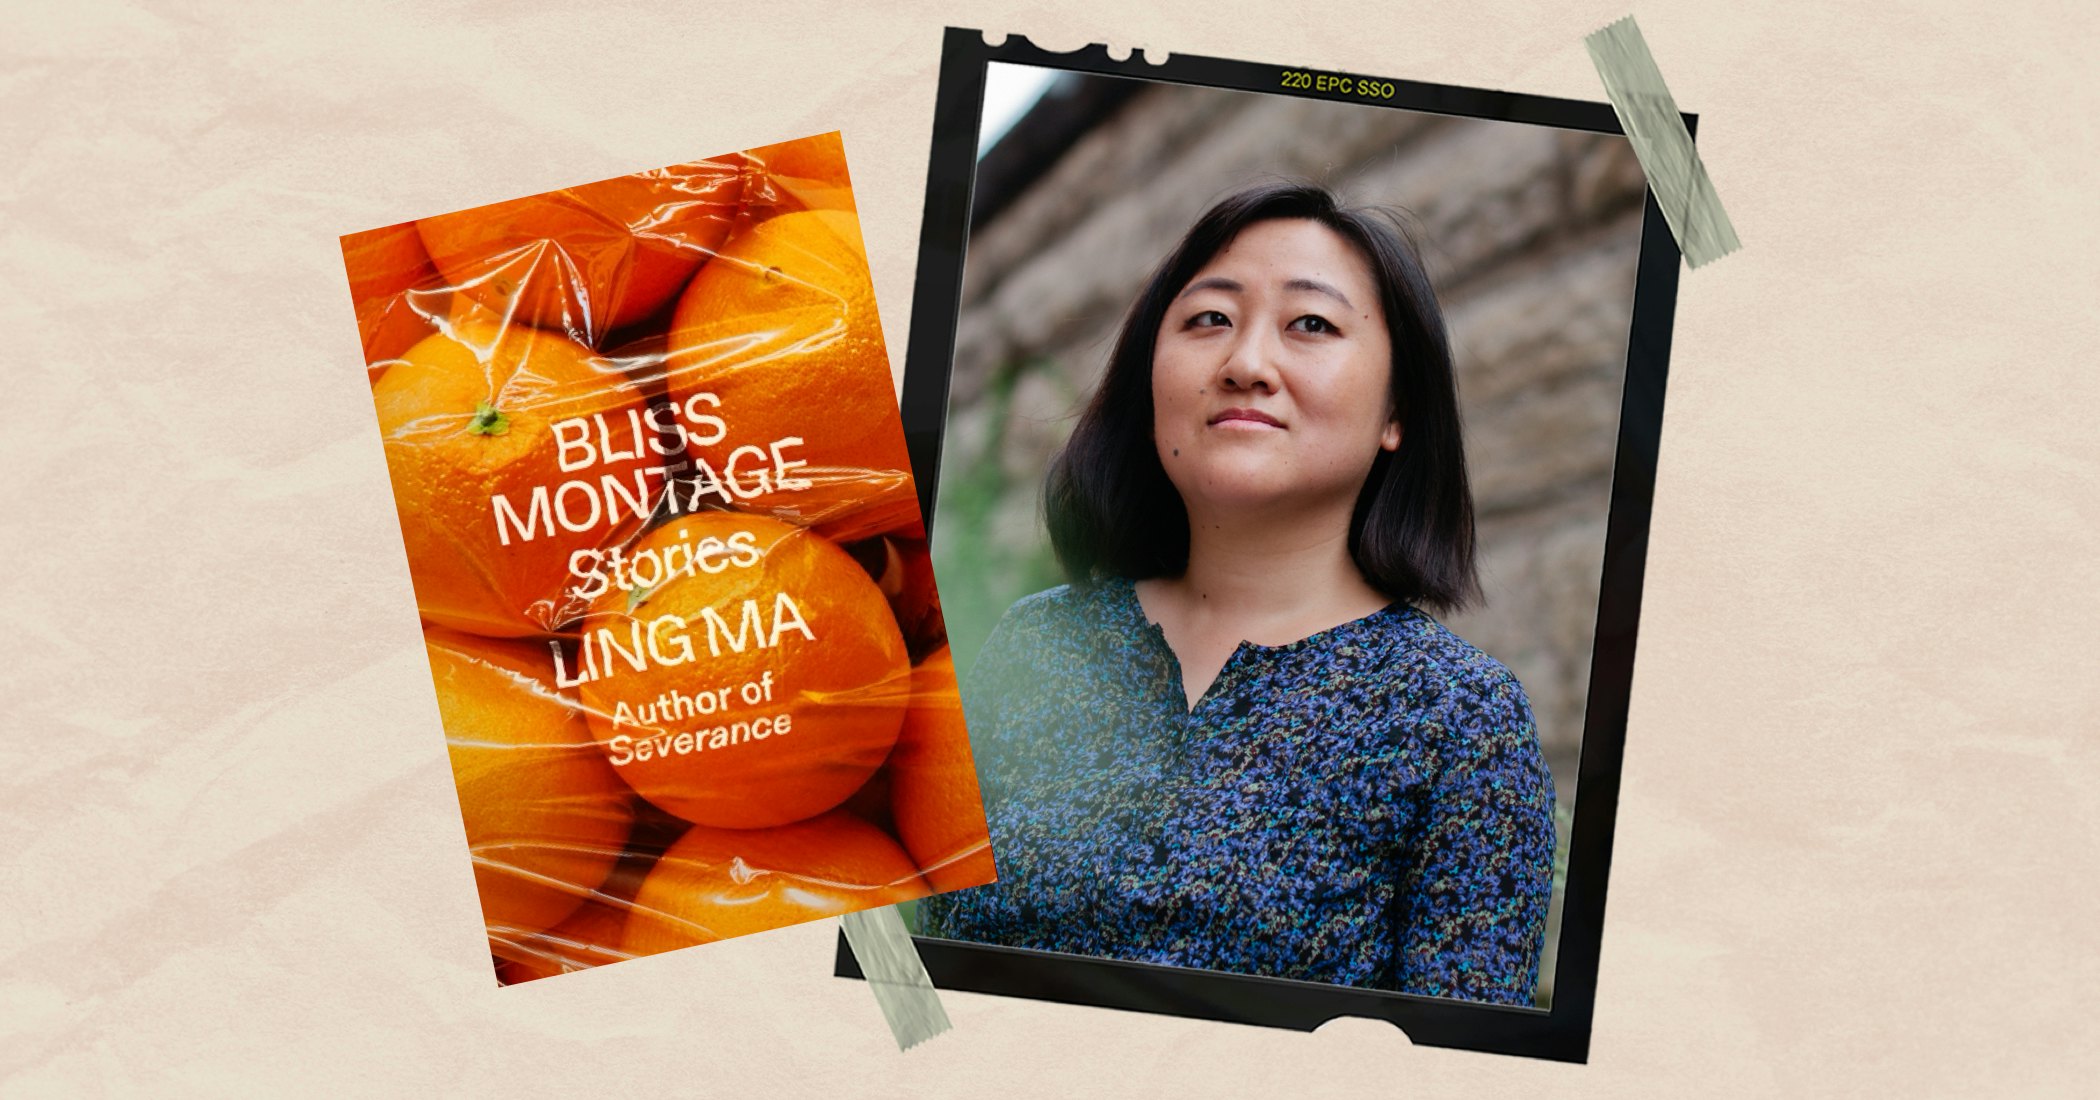 Bliss Montage by Ling Ma